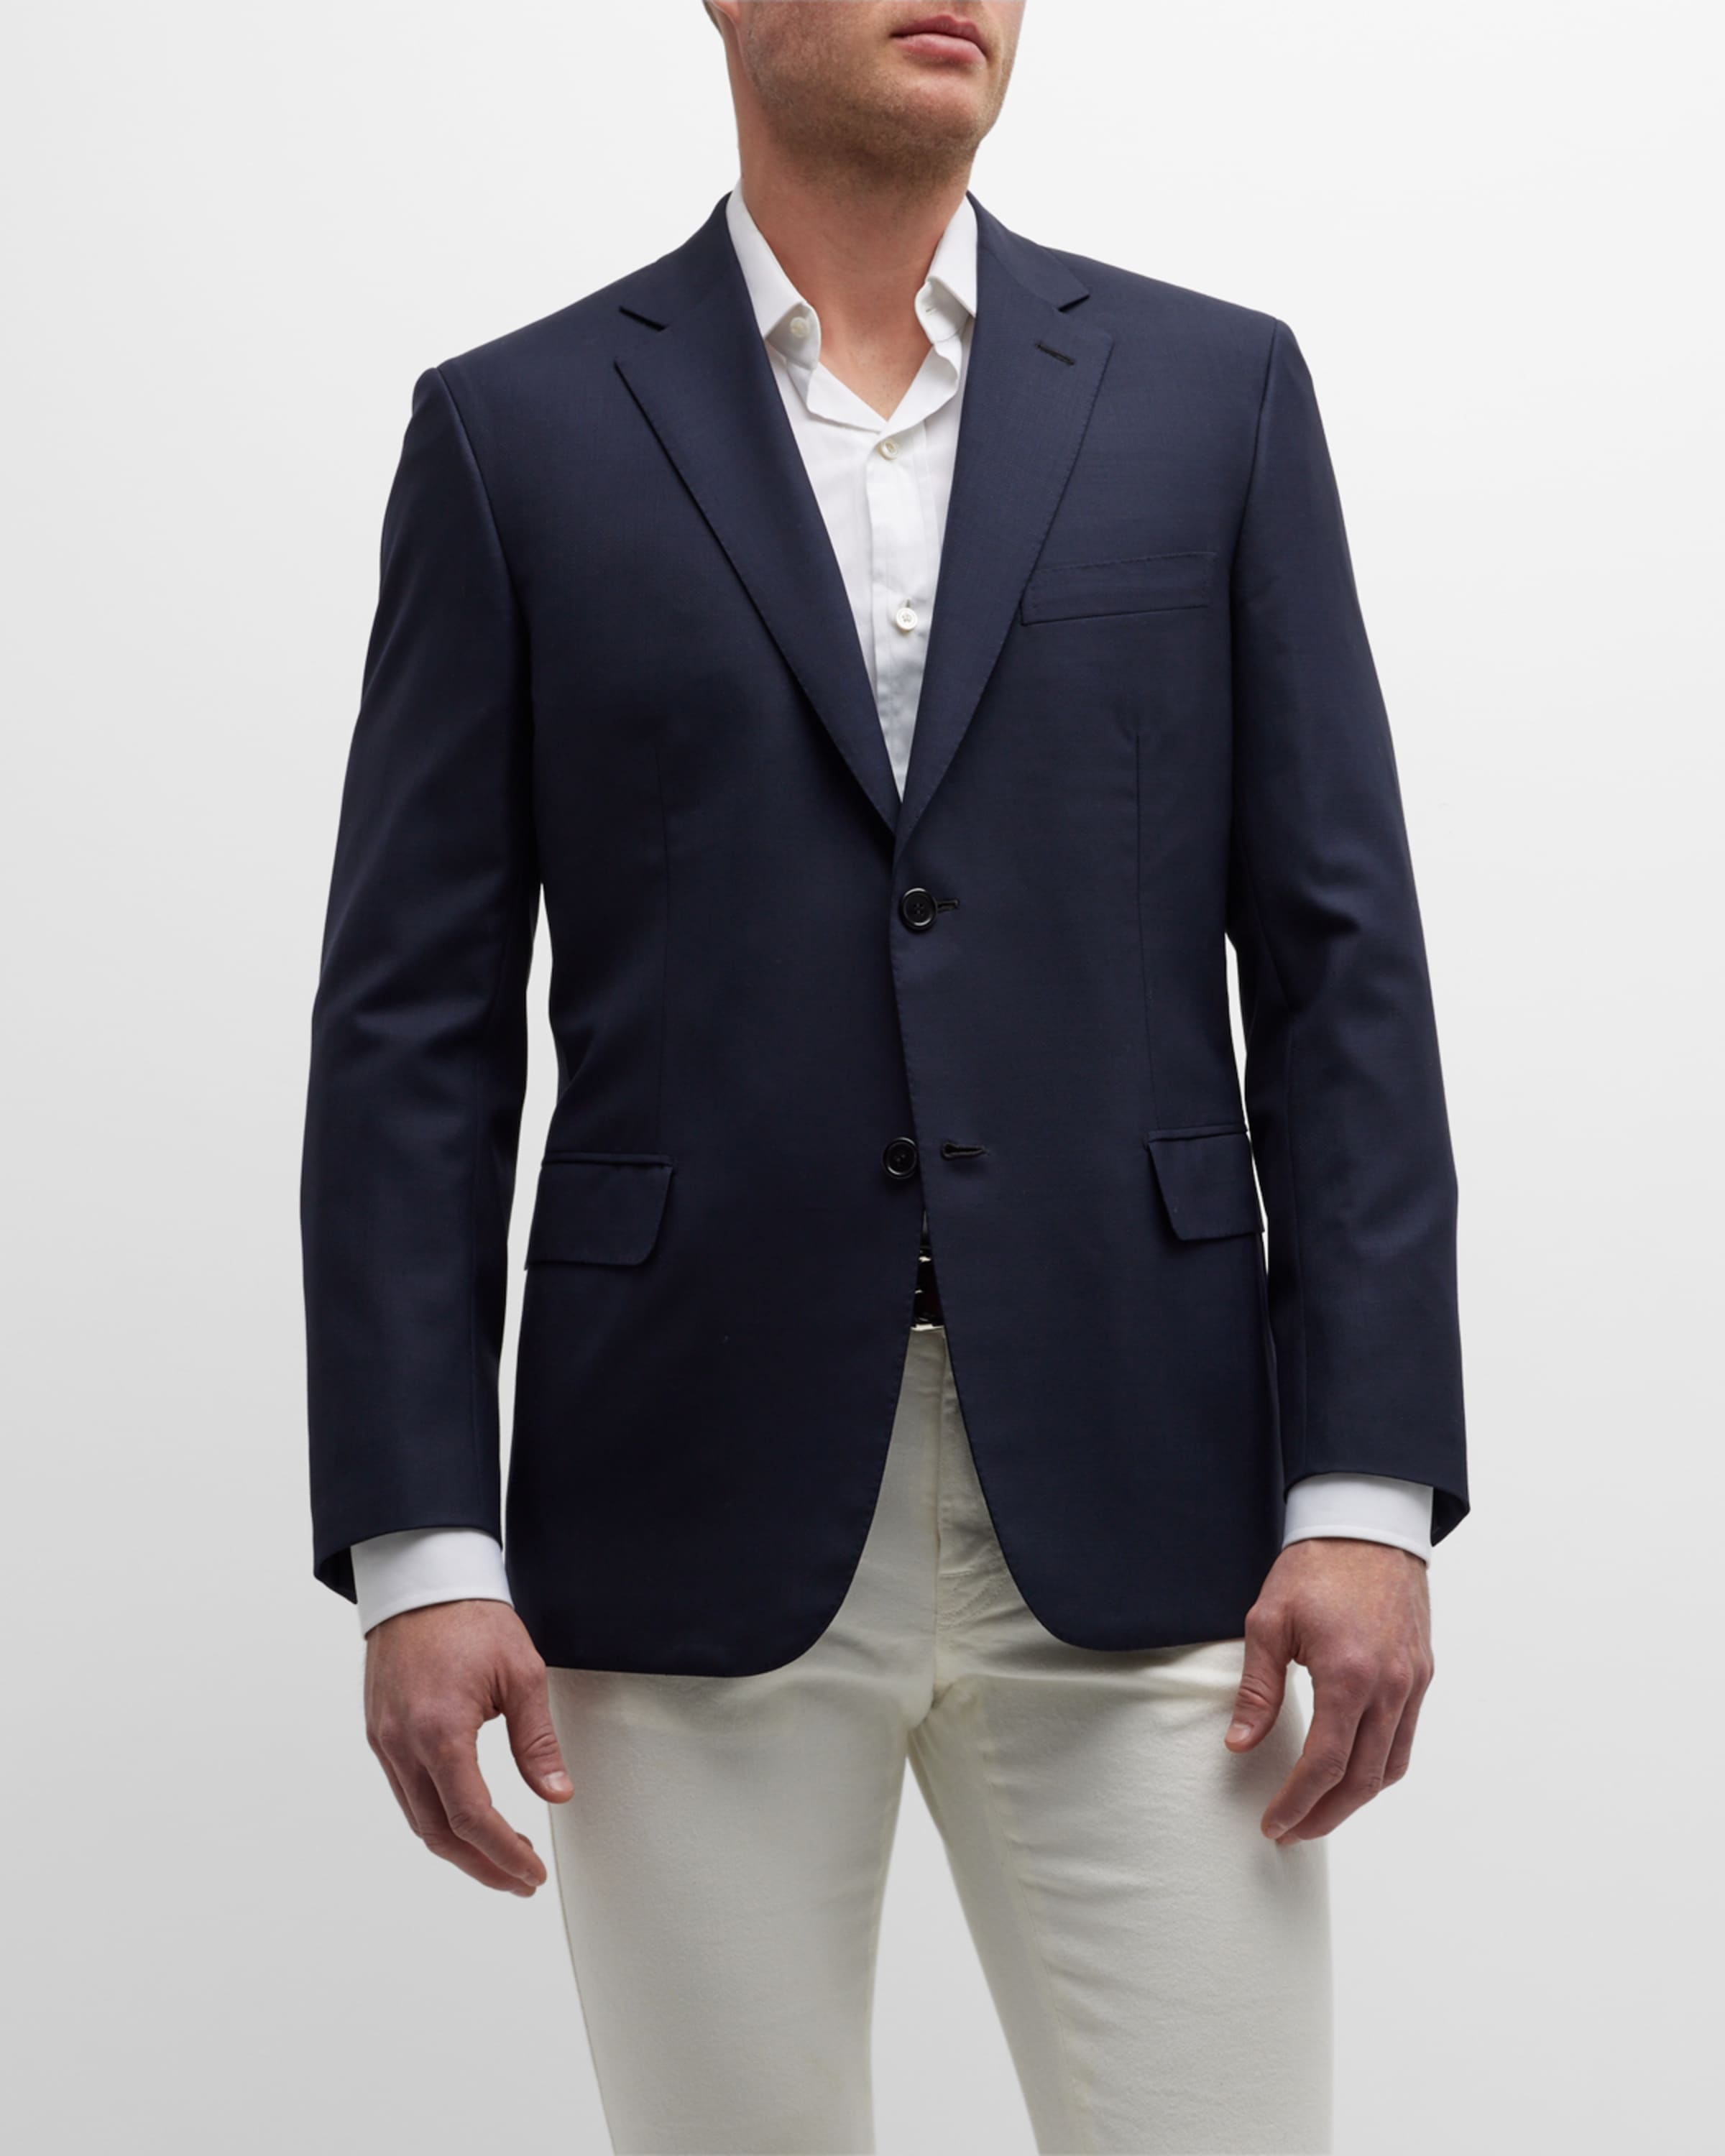 Ravello Wool Two-Button Sport Coat, Navy Blue - 2